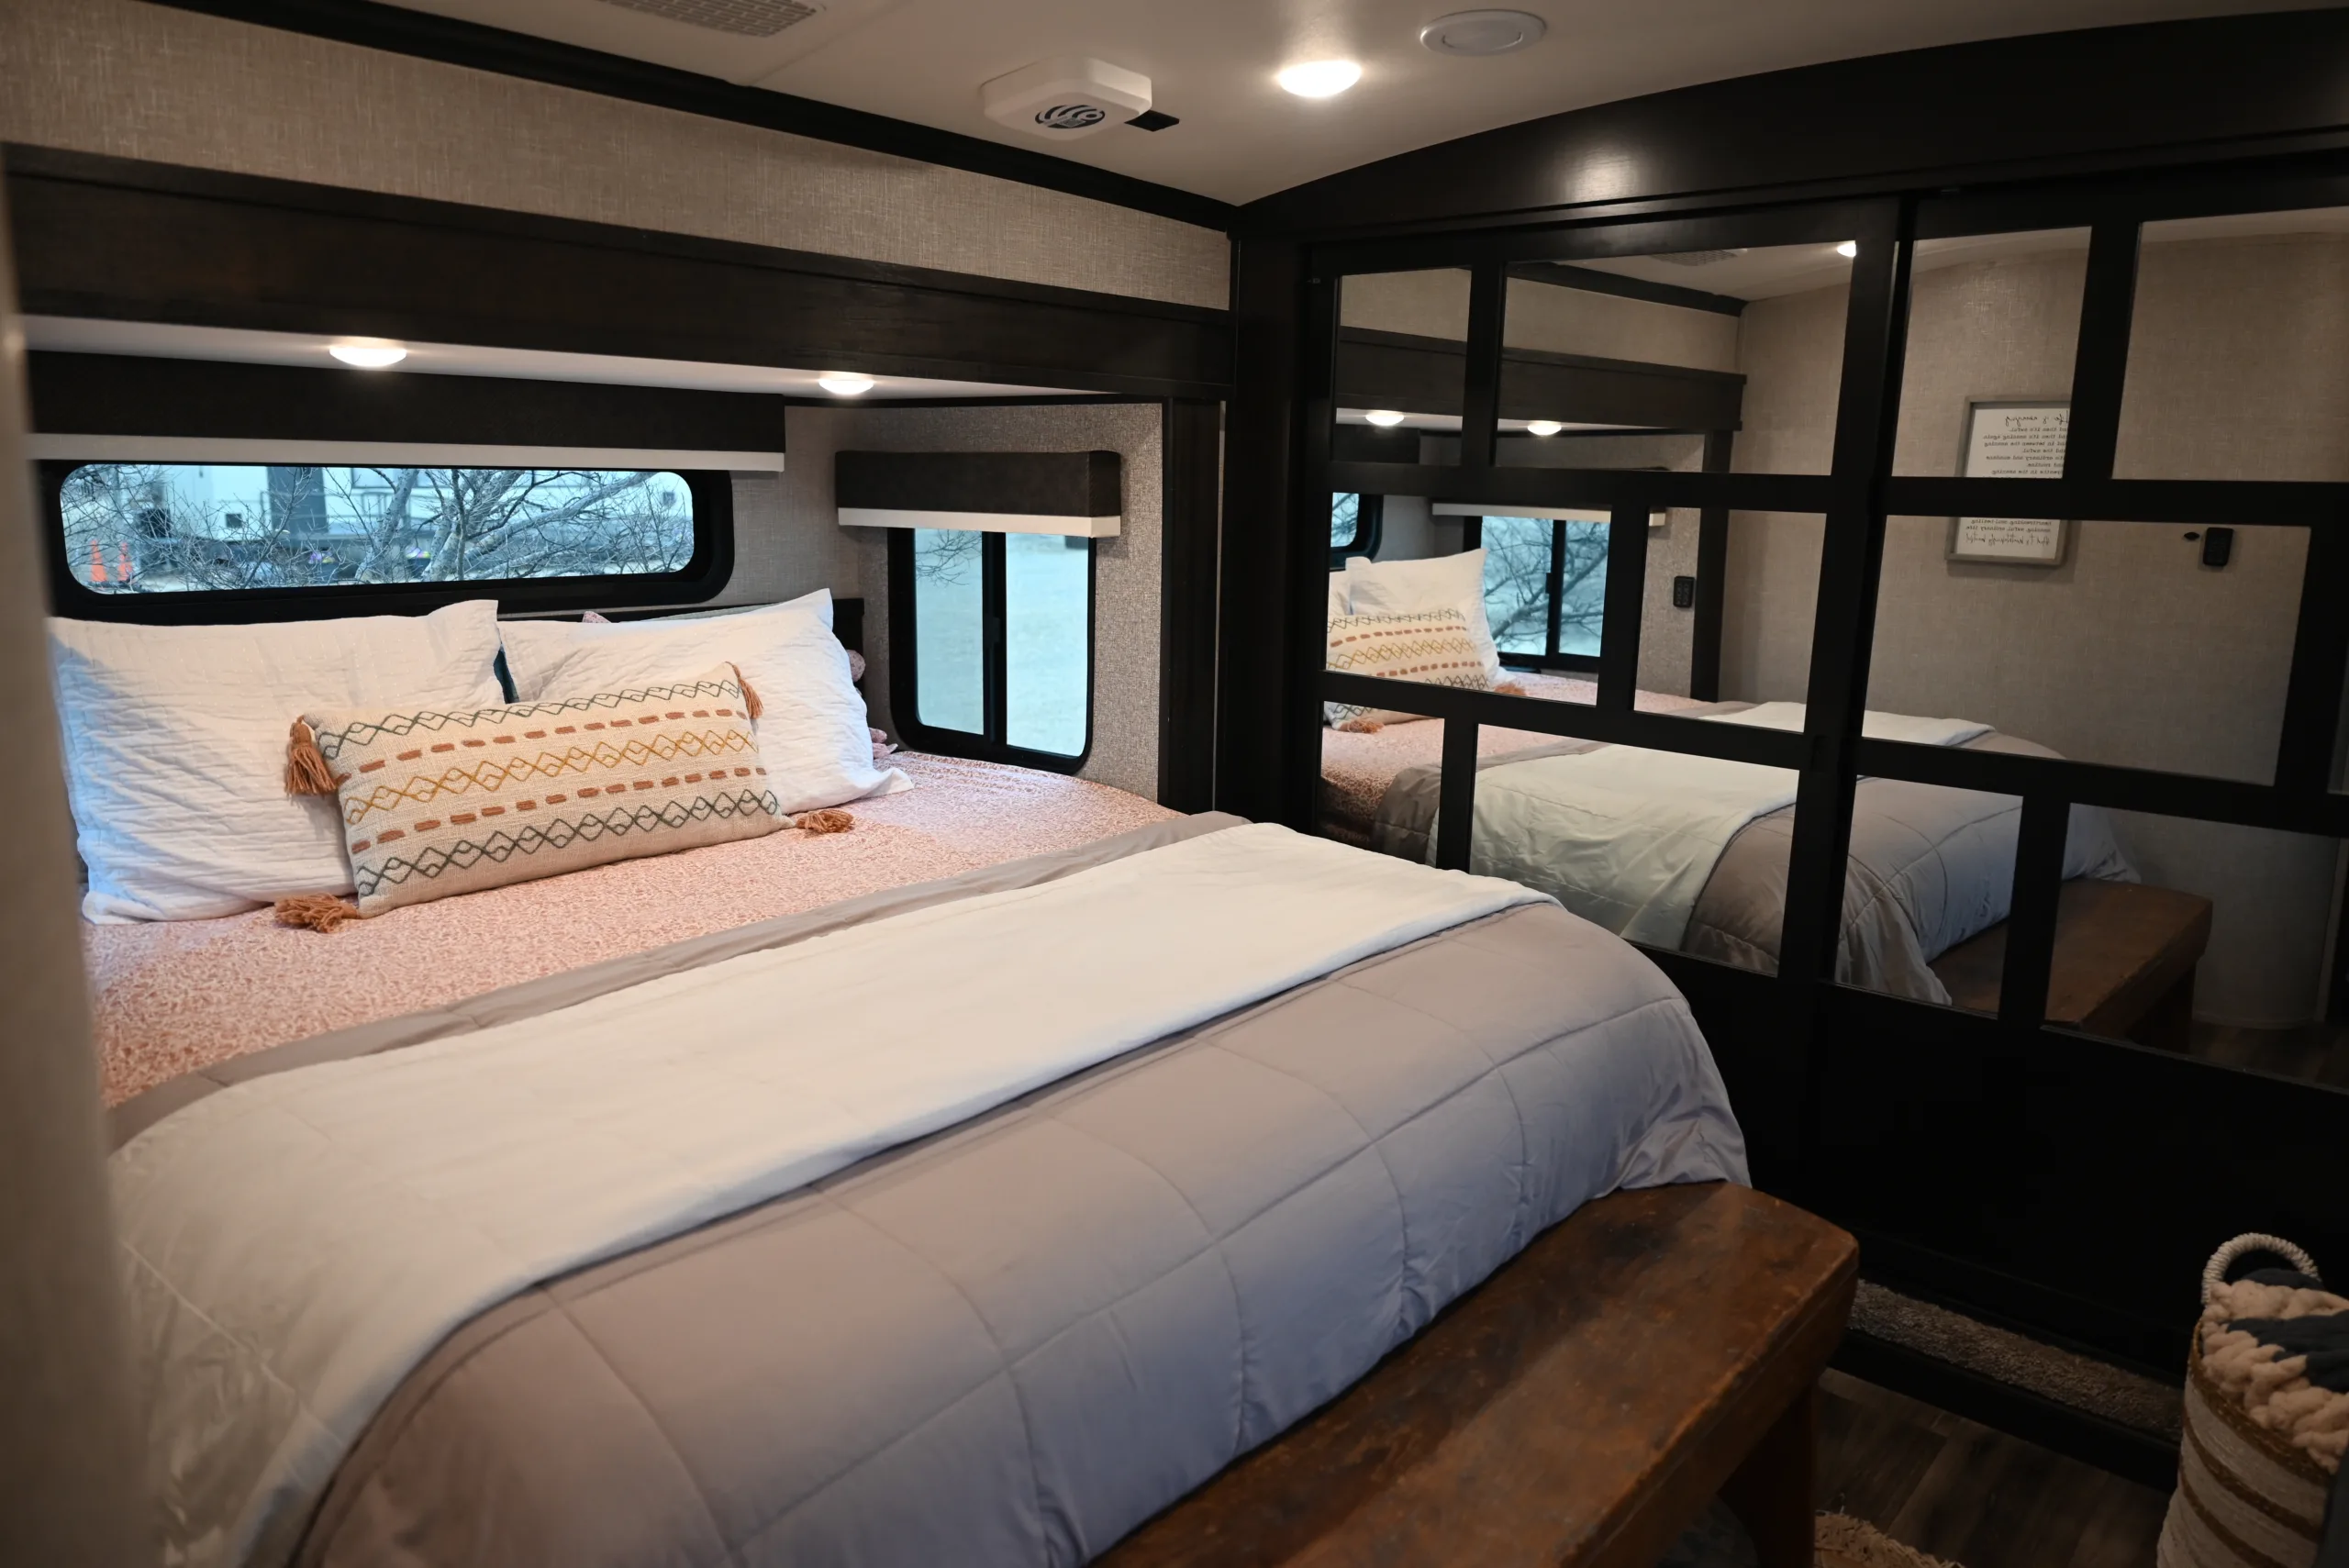 images for springtime rV renovations, a bed sitting inside of a bedroom on top of a white bed covered in a white bedspread